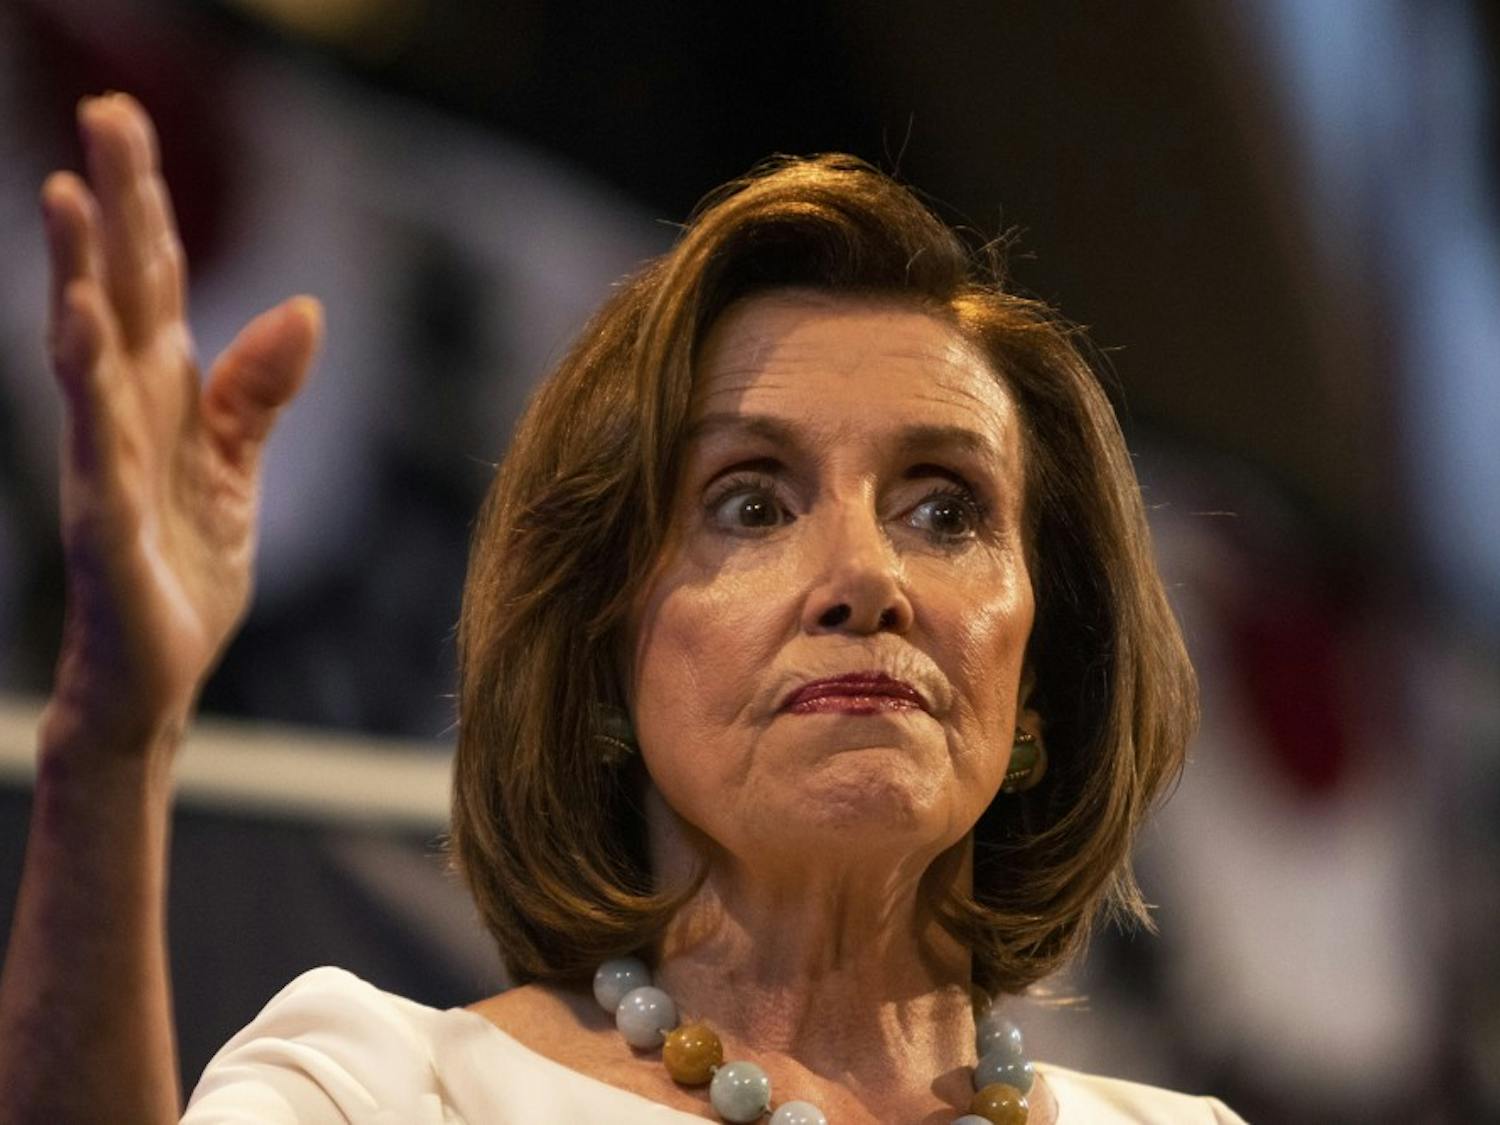 GALLERY: Speaker Nancy Pelosi stokes hope for young Democrats at national convention